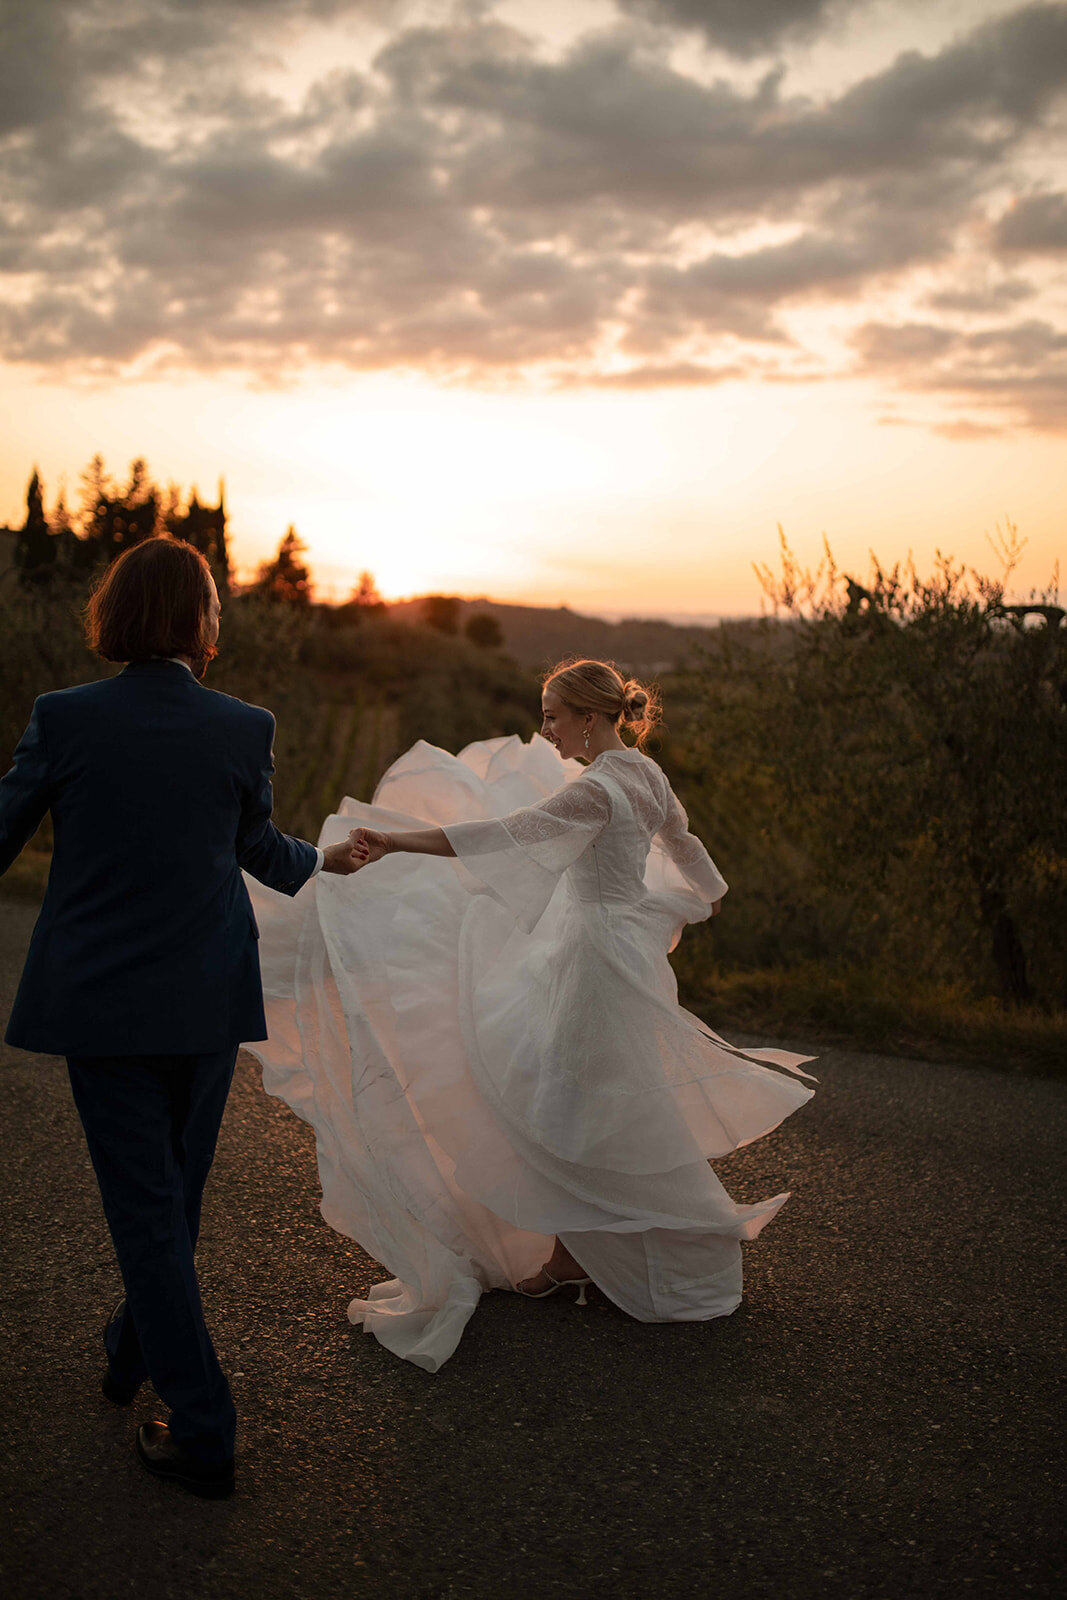 Golden hour photography in Tuscany